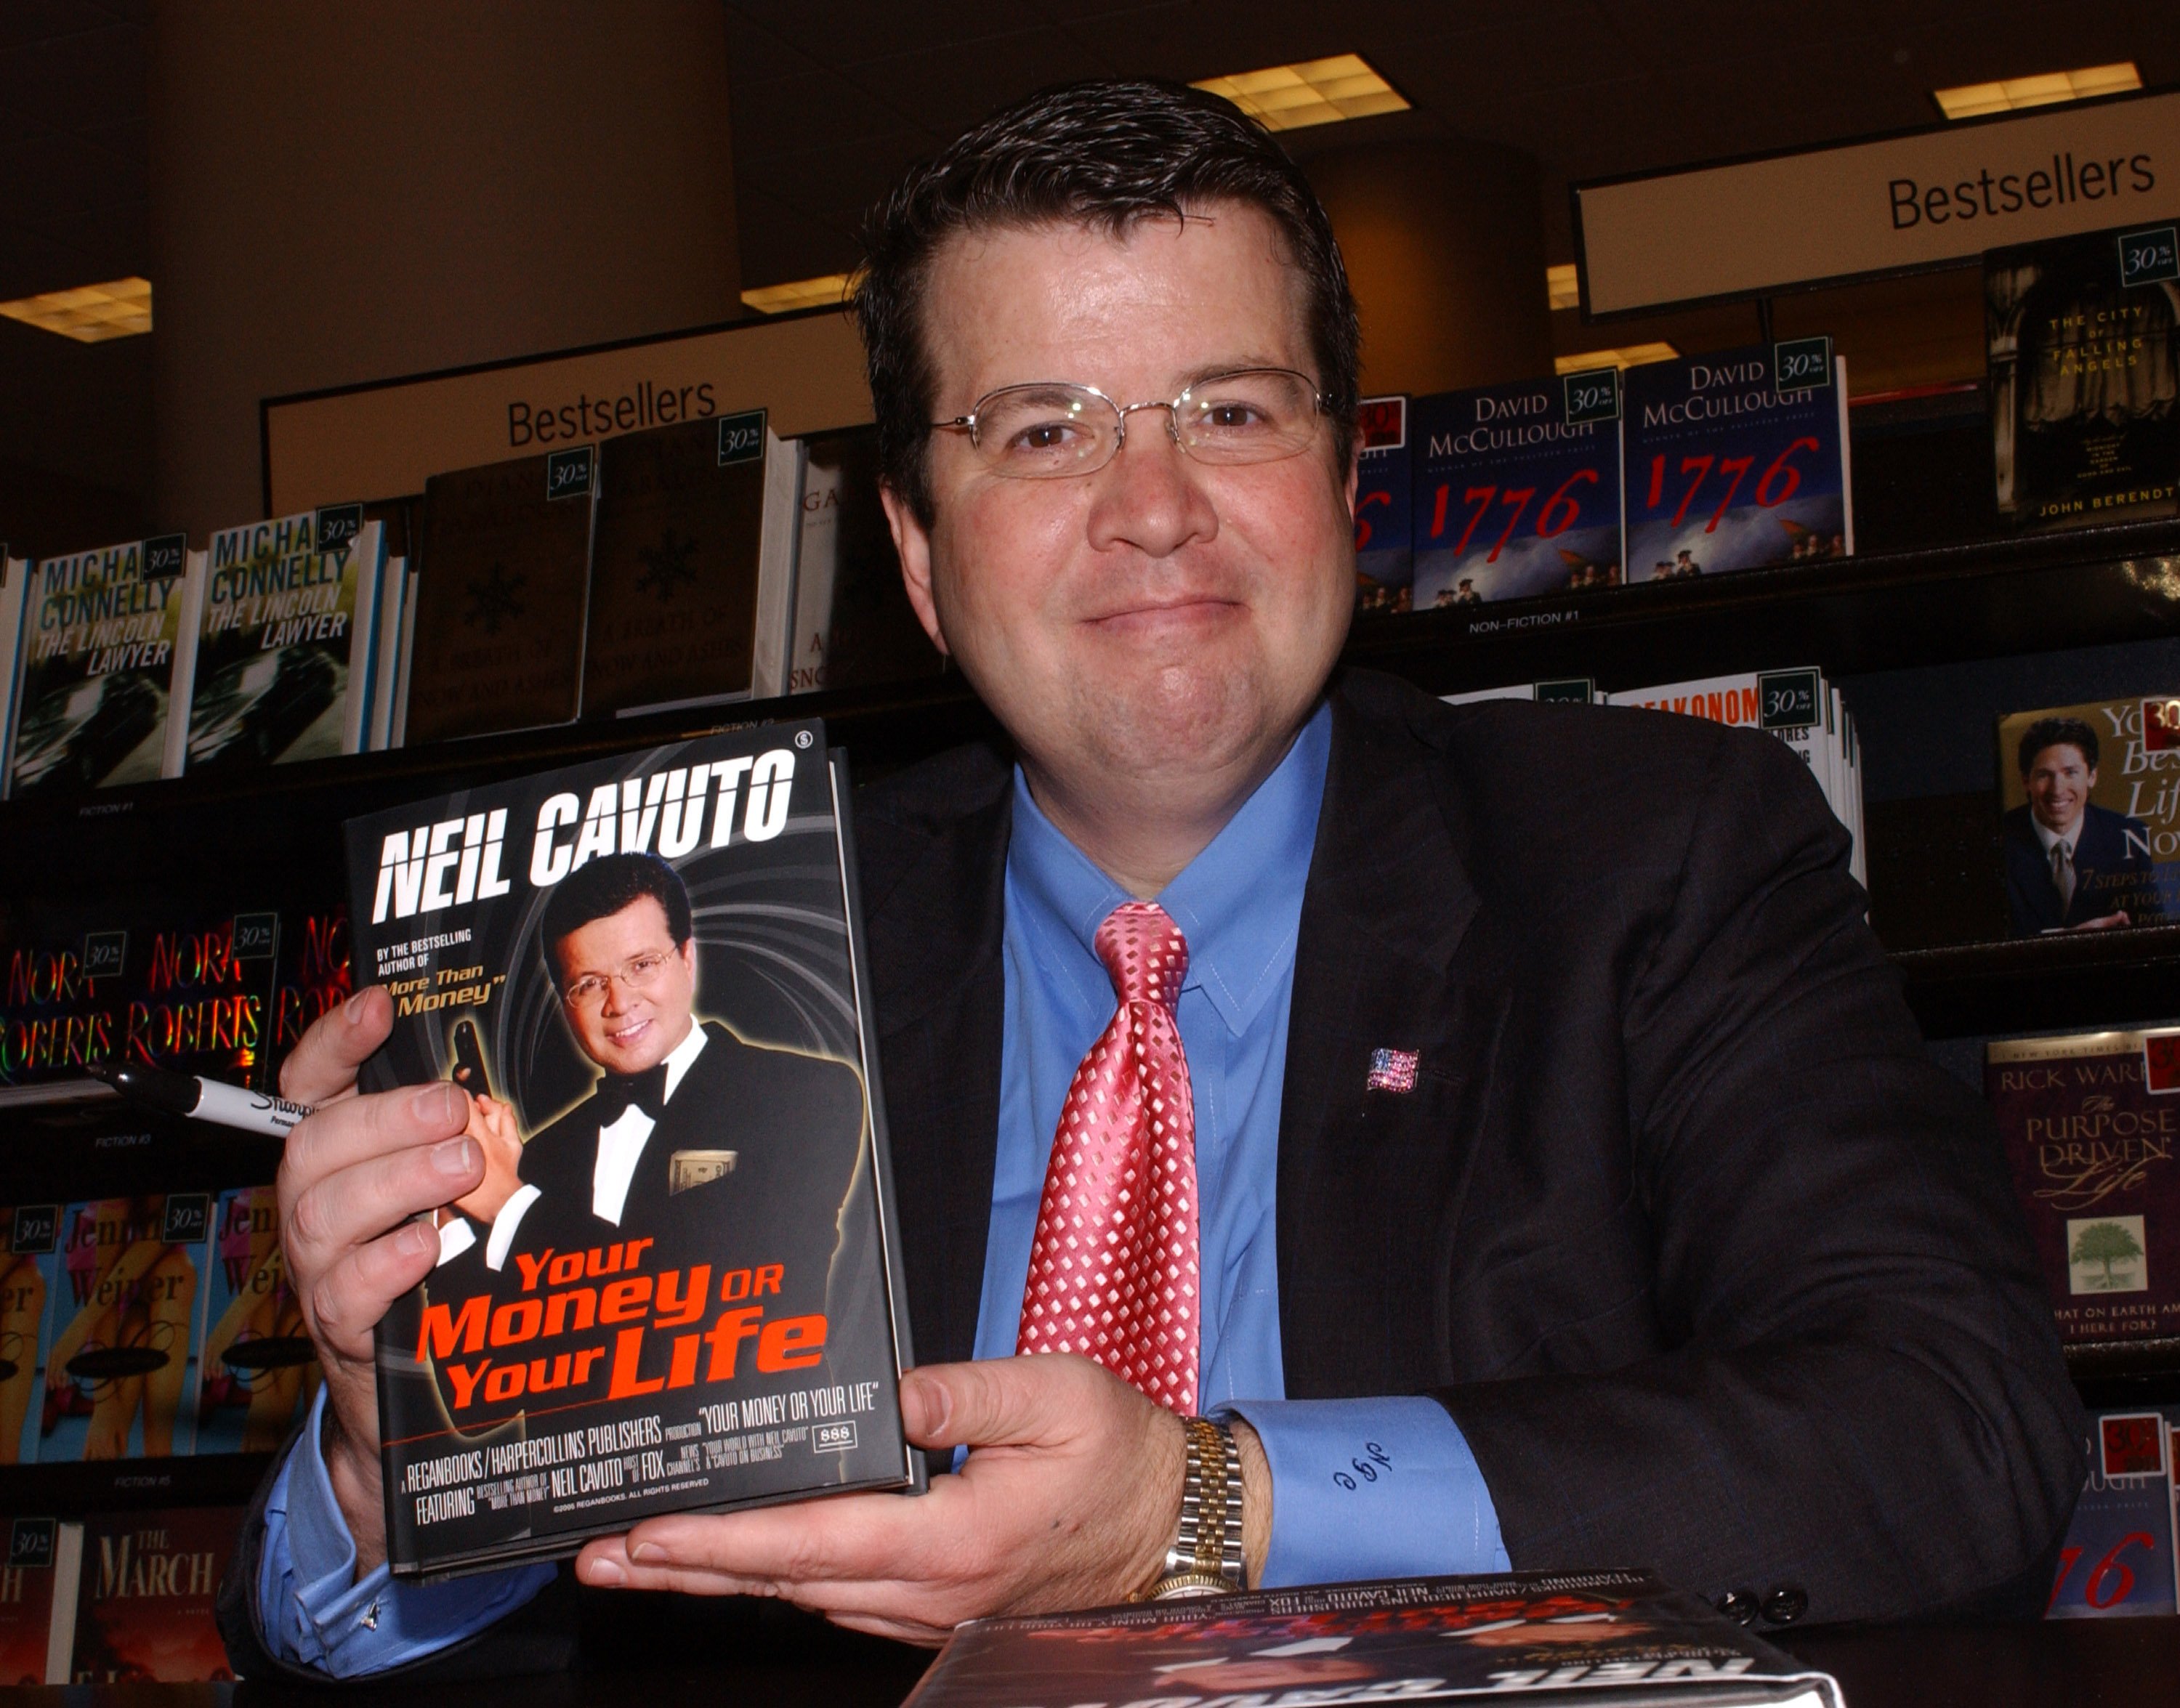 FOX News Channel's Neil Cavuto attends a book signing for his new book "Your Money or Your Life" October 13, 2005 in Chicago, Illinois | Photo: Getty Images